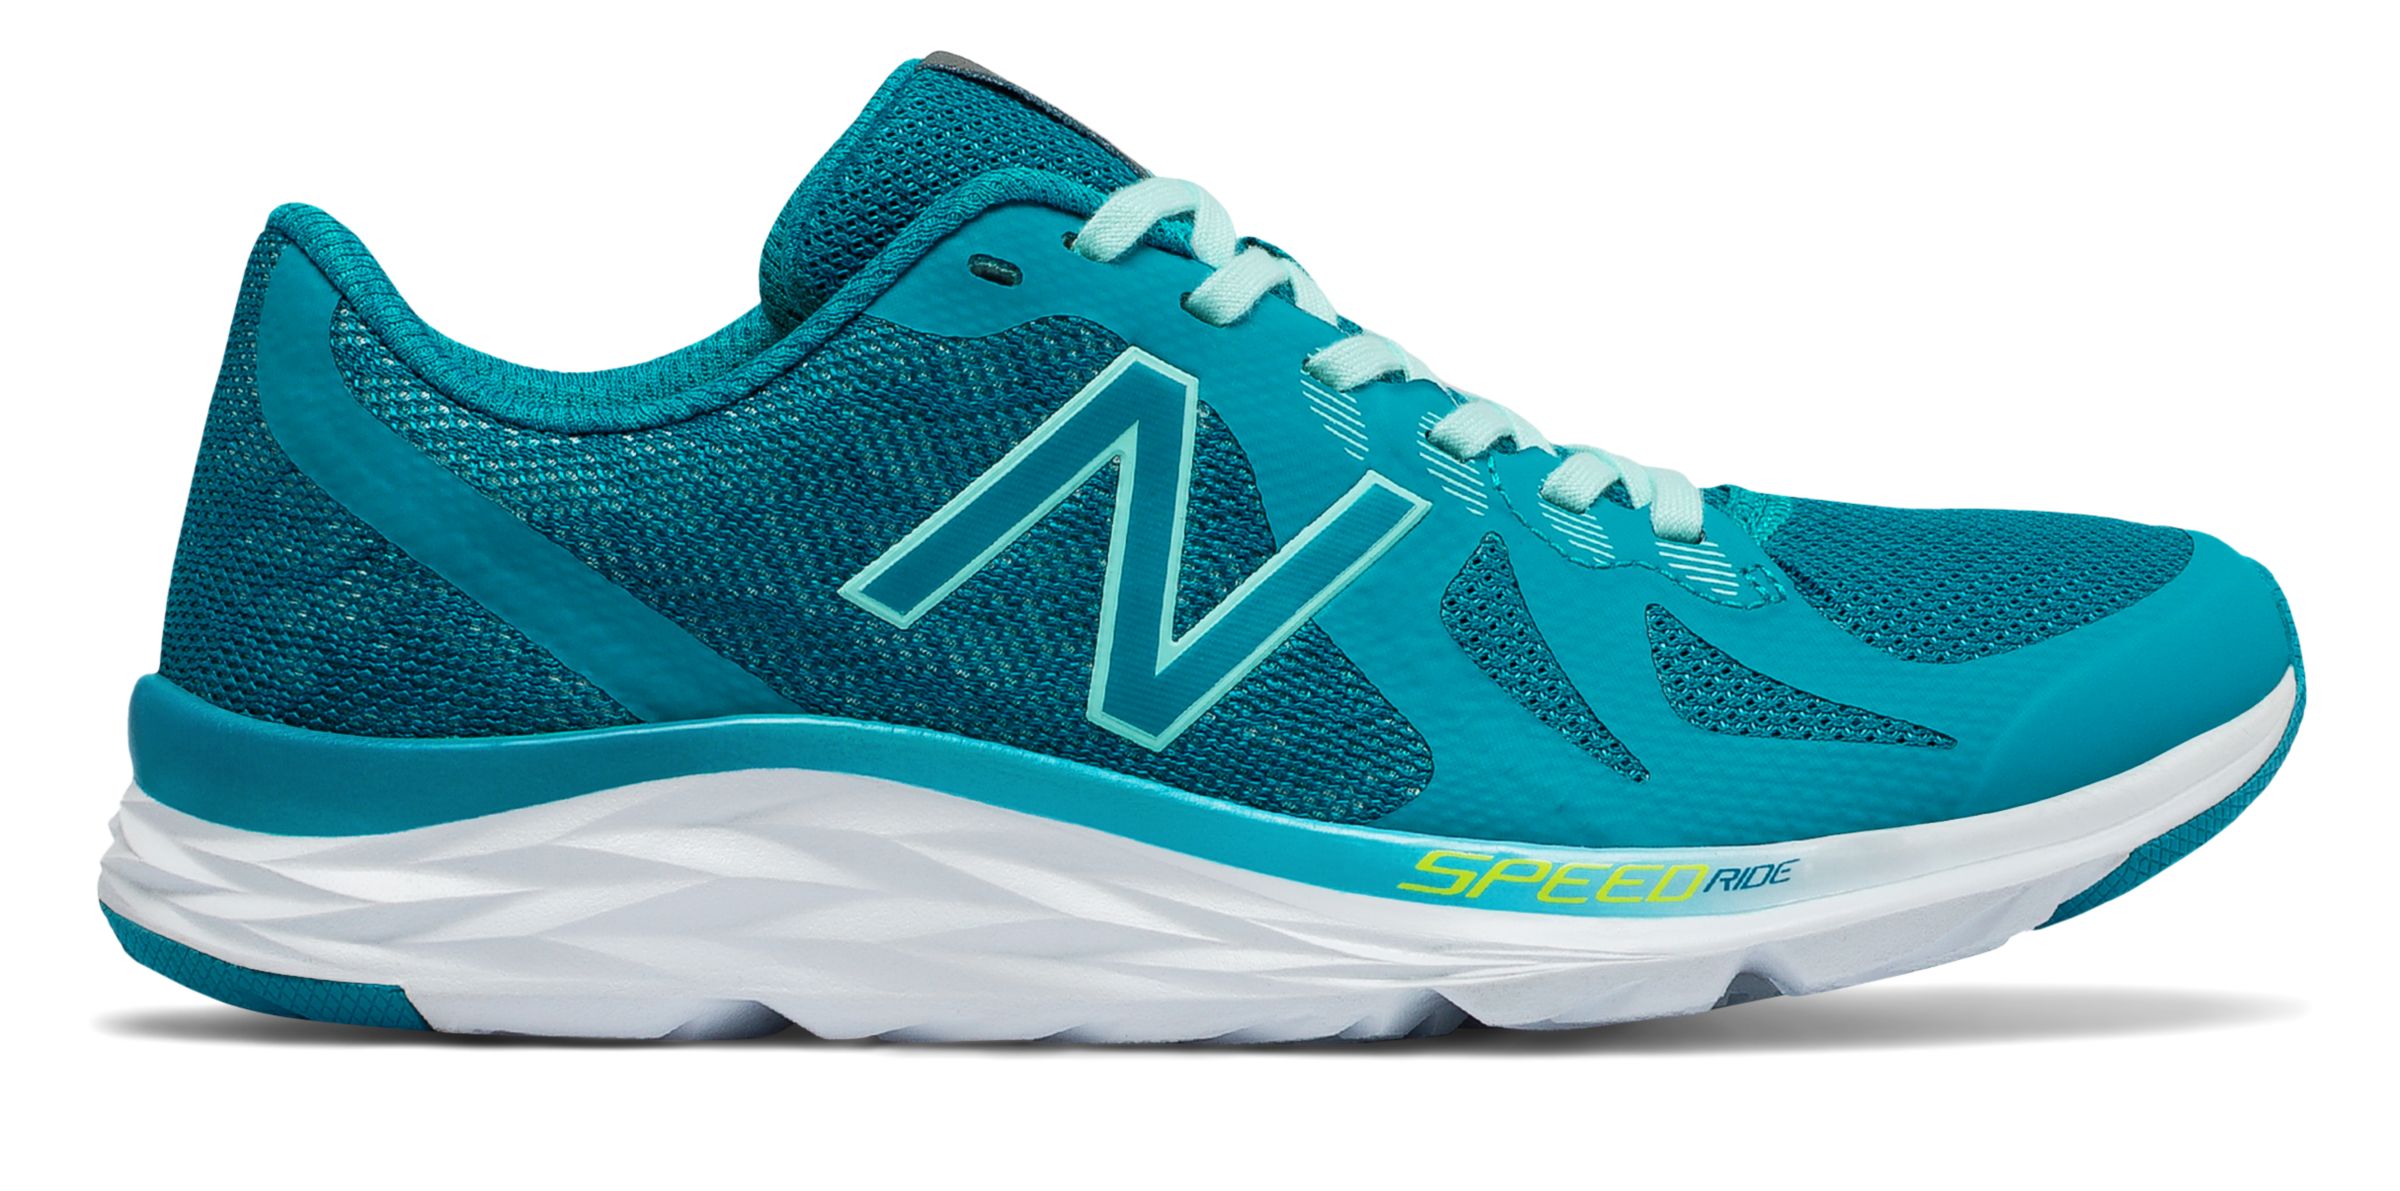 New Balance W790-V6 on Sale - Discounts Up to 20% Off on W790RO6 at Joe's New  Balance Outlet